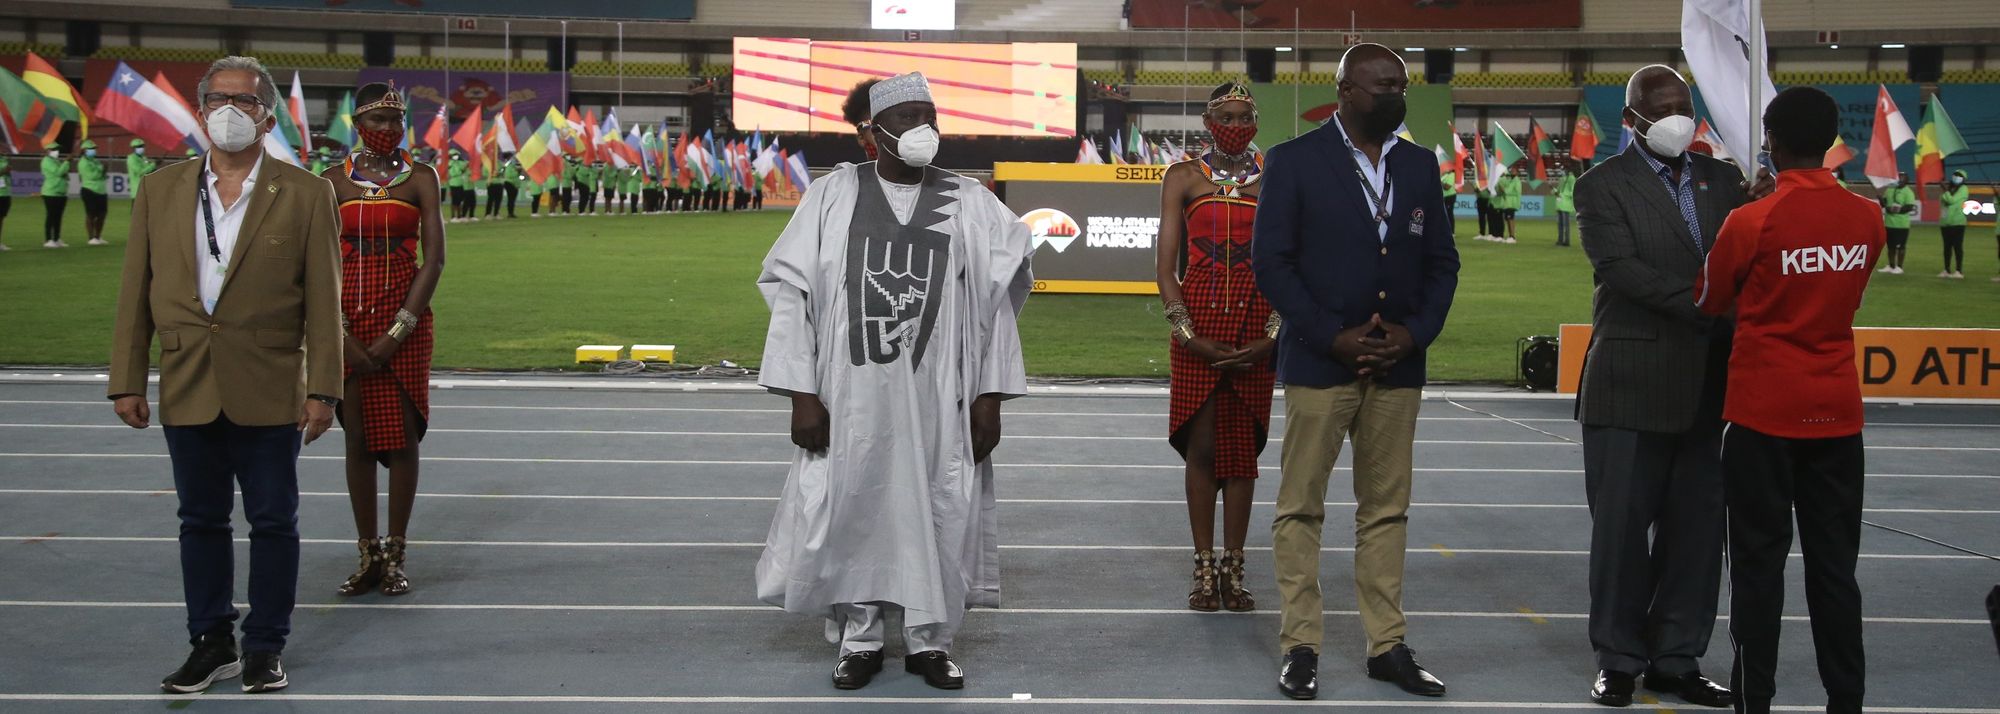 The World Athletics U20 Championships in Nairobi have earned their place in the history books with four world U20 records, 15 championship records, 11 area U20 records, 68 national U20 records and 10 national senior records.